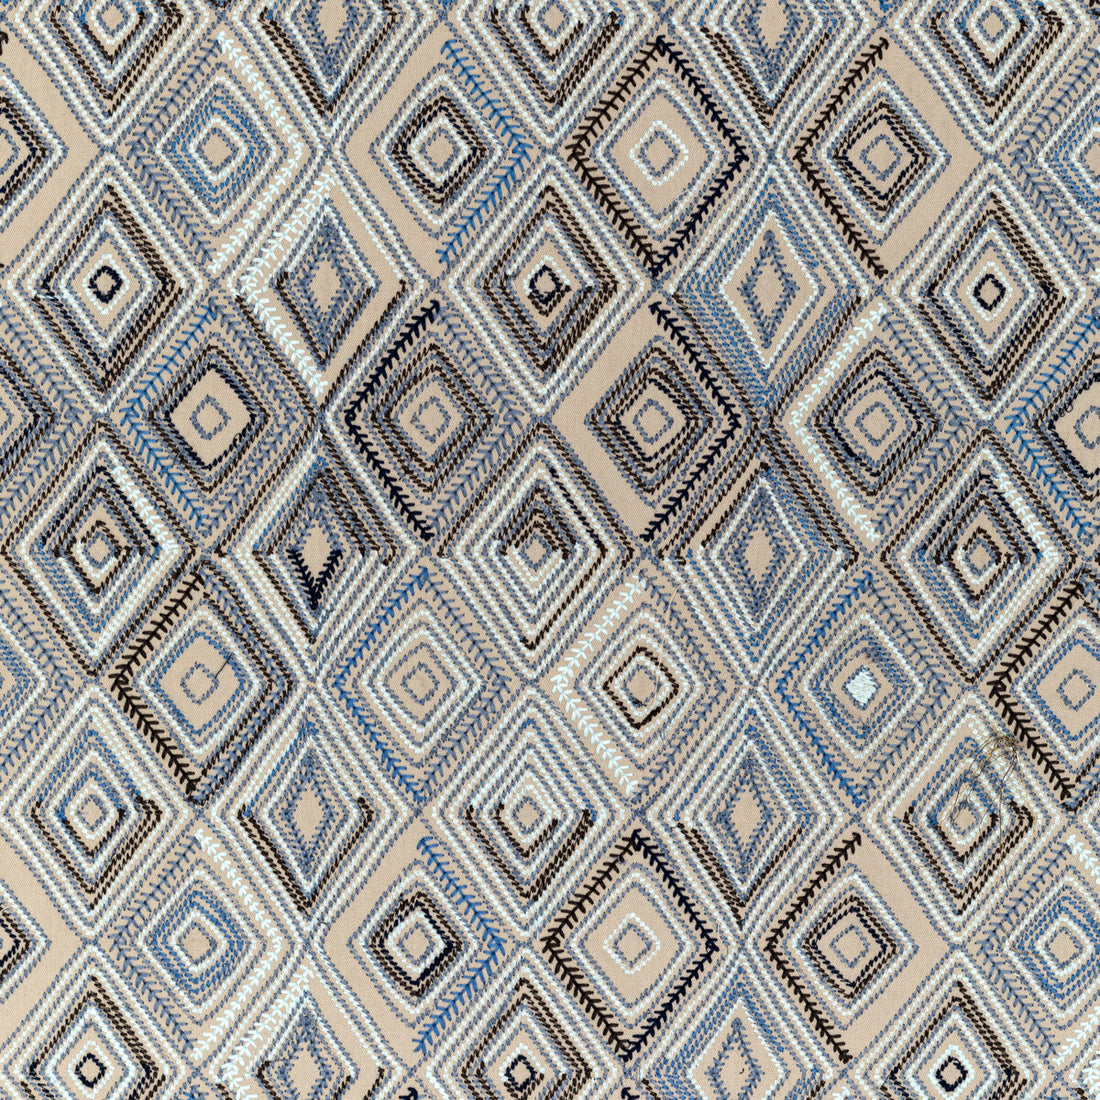 Bowen Embroidery fabric in denim color - pattern 2020208.505.0 - by Lee Jofa in the Breckenridge collection